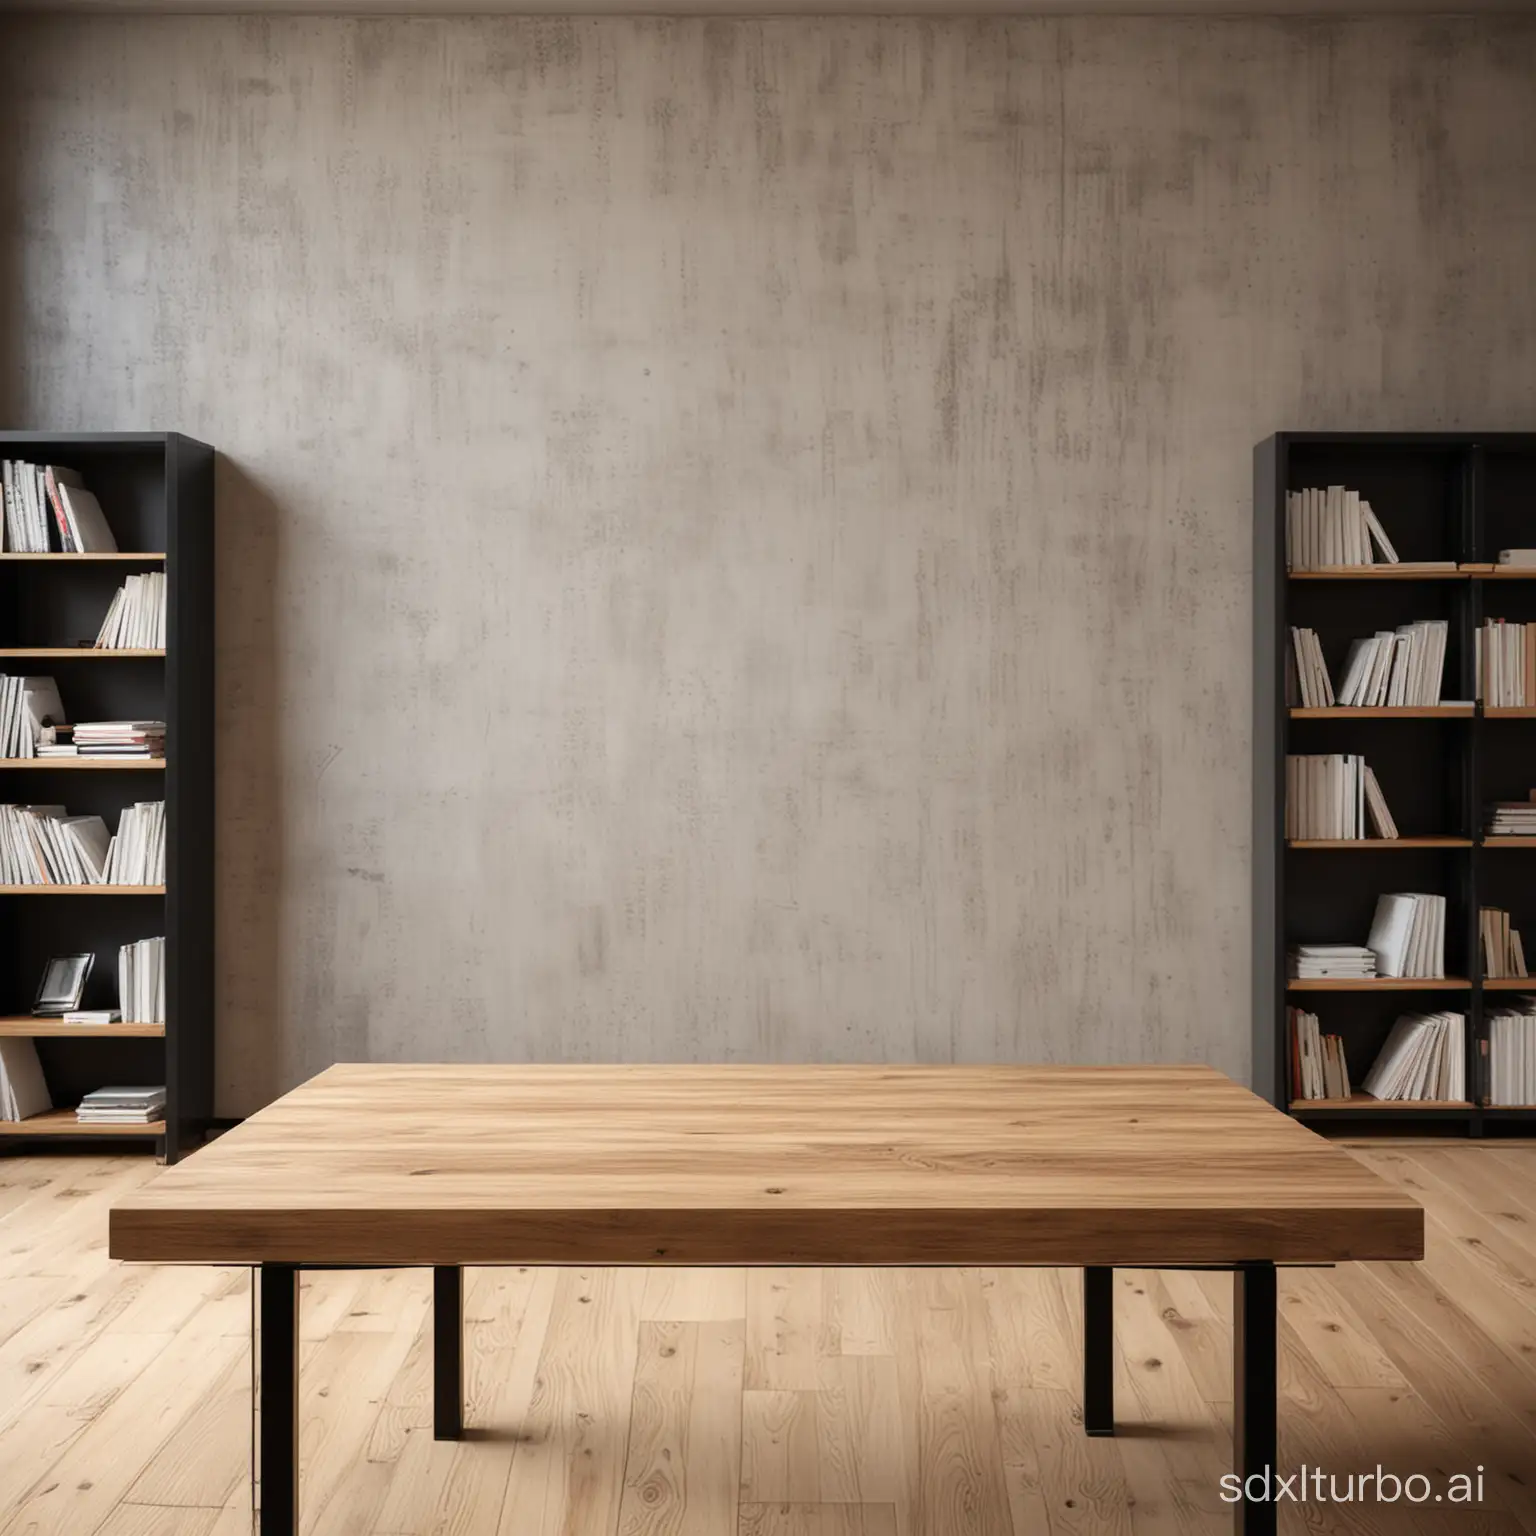 create a scene with an office table, a blurred black bookshelf in the background, light burnt cement wall, light wooden floor. Pleasant ambient light, blurred background. front view from above.